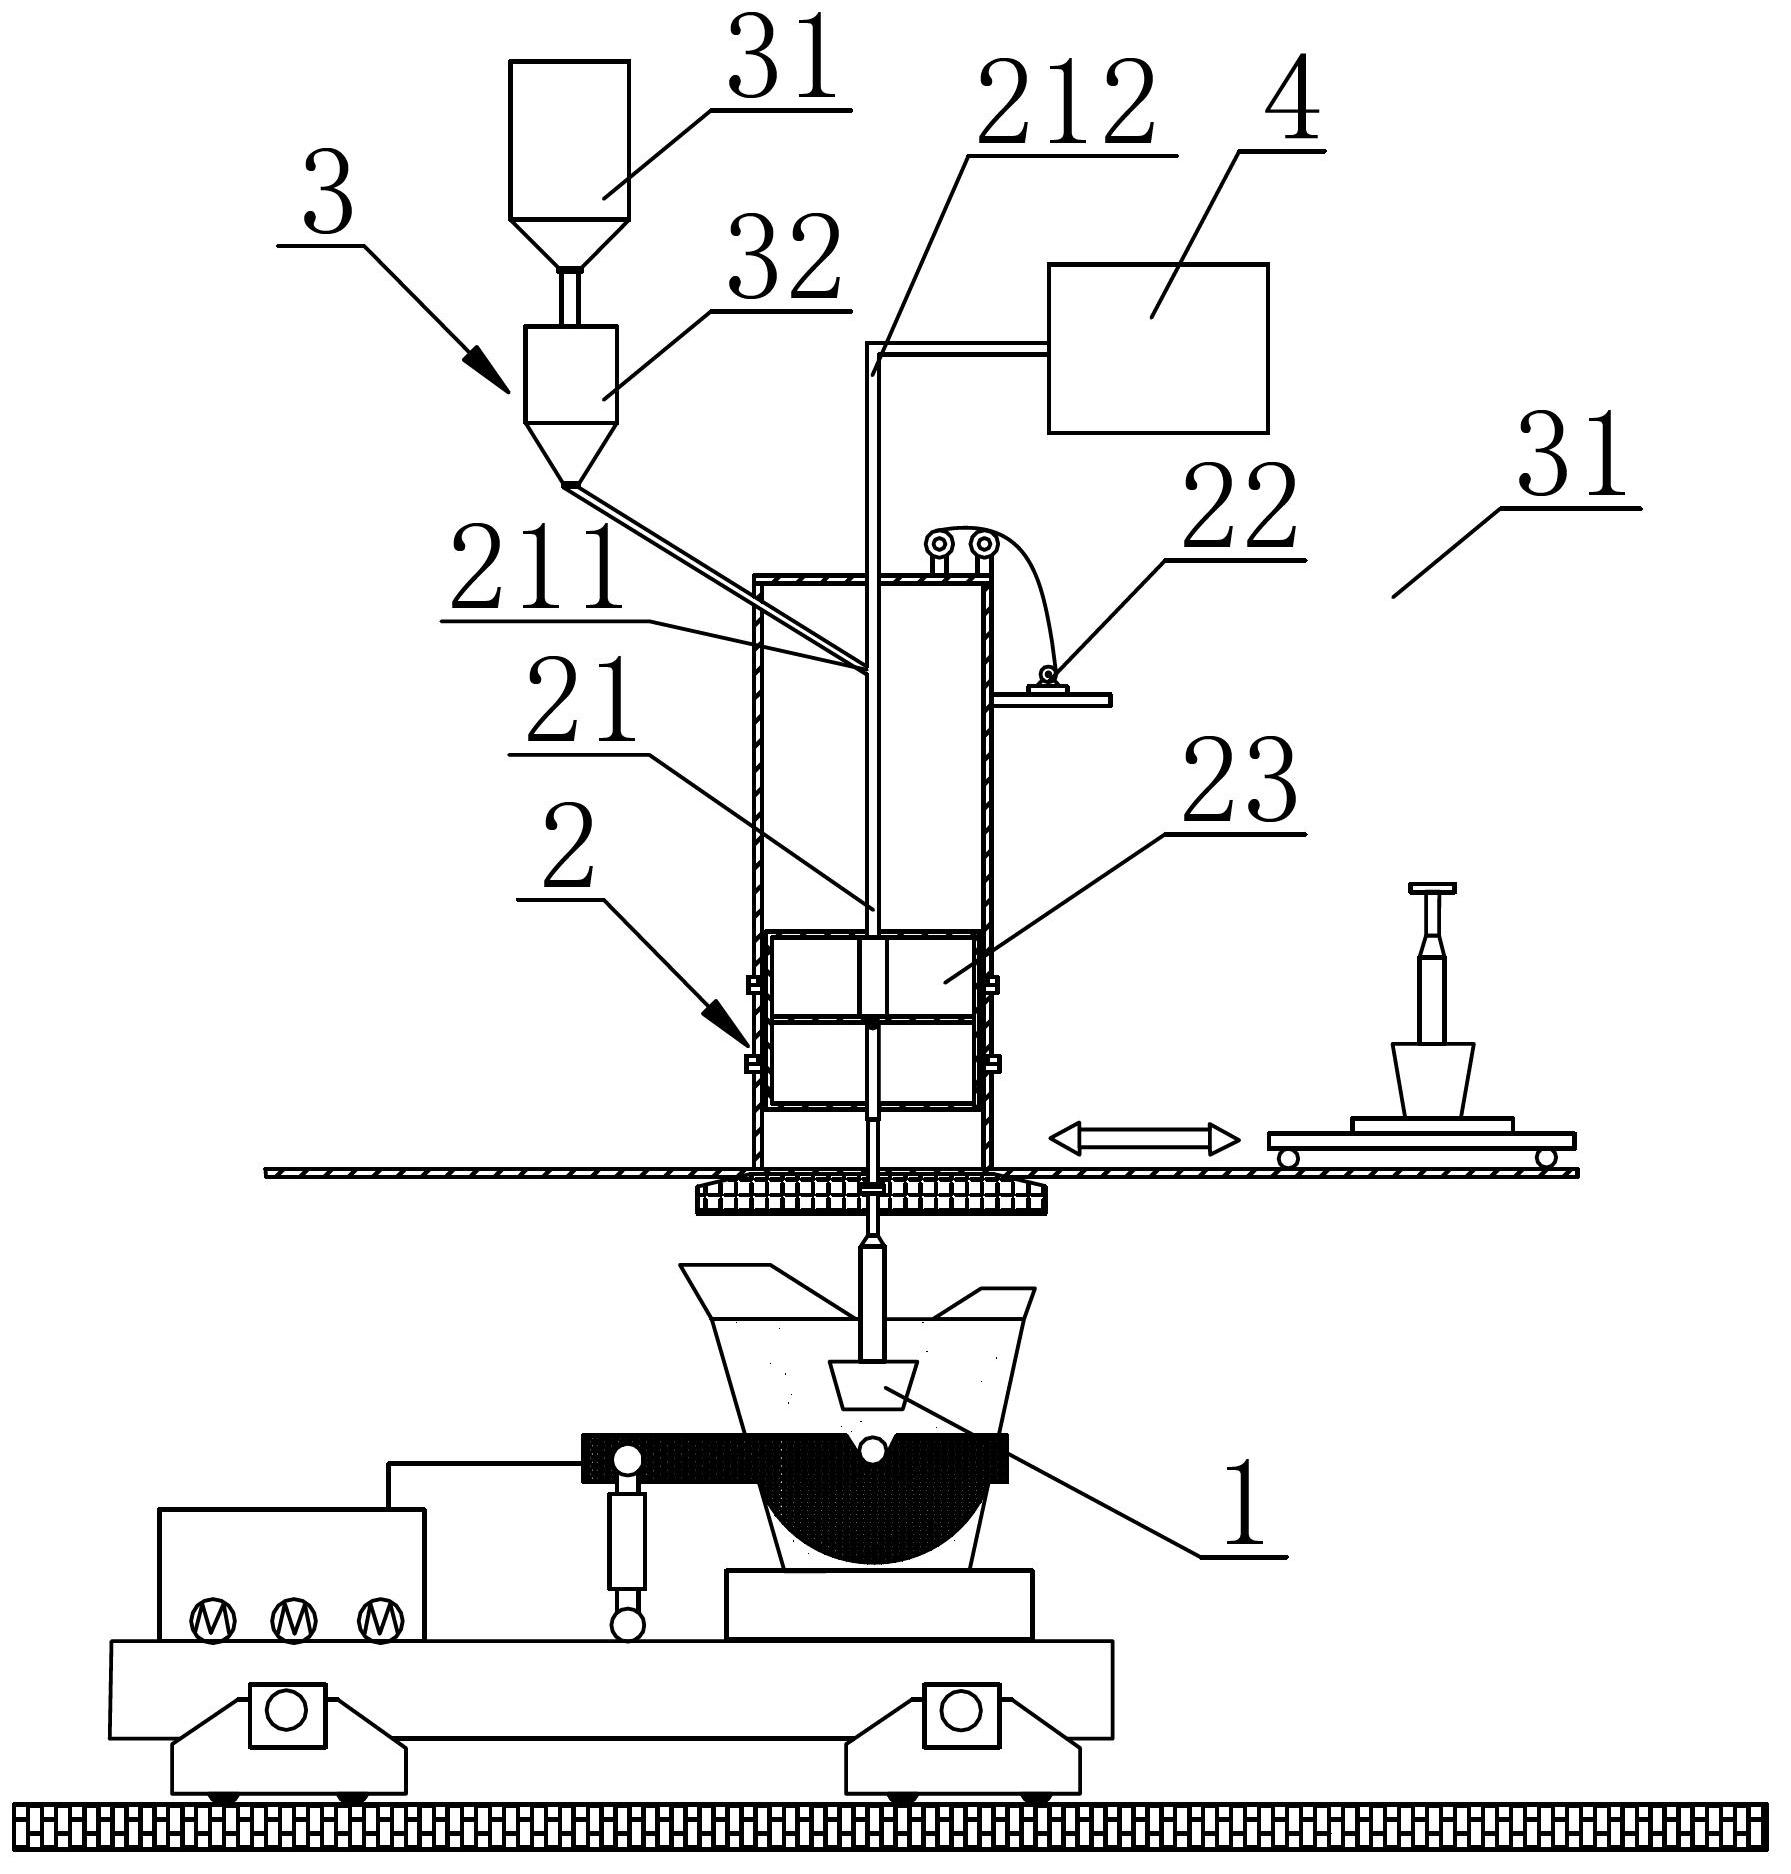 KR (knotted reactor) powder spraying, stirring and desulfurizing device and method